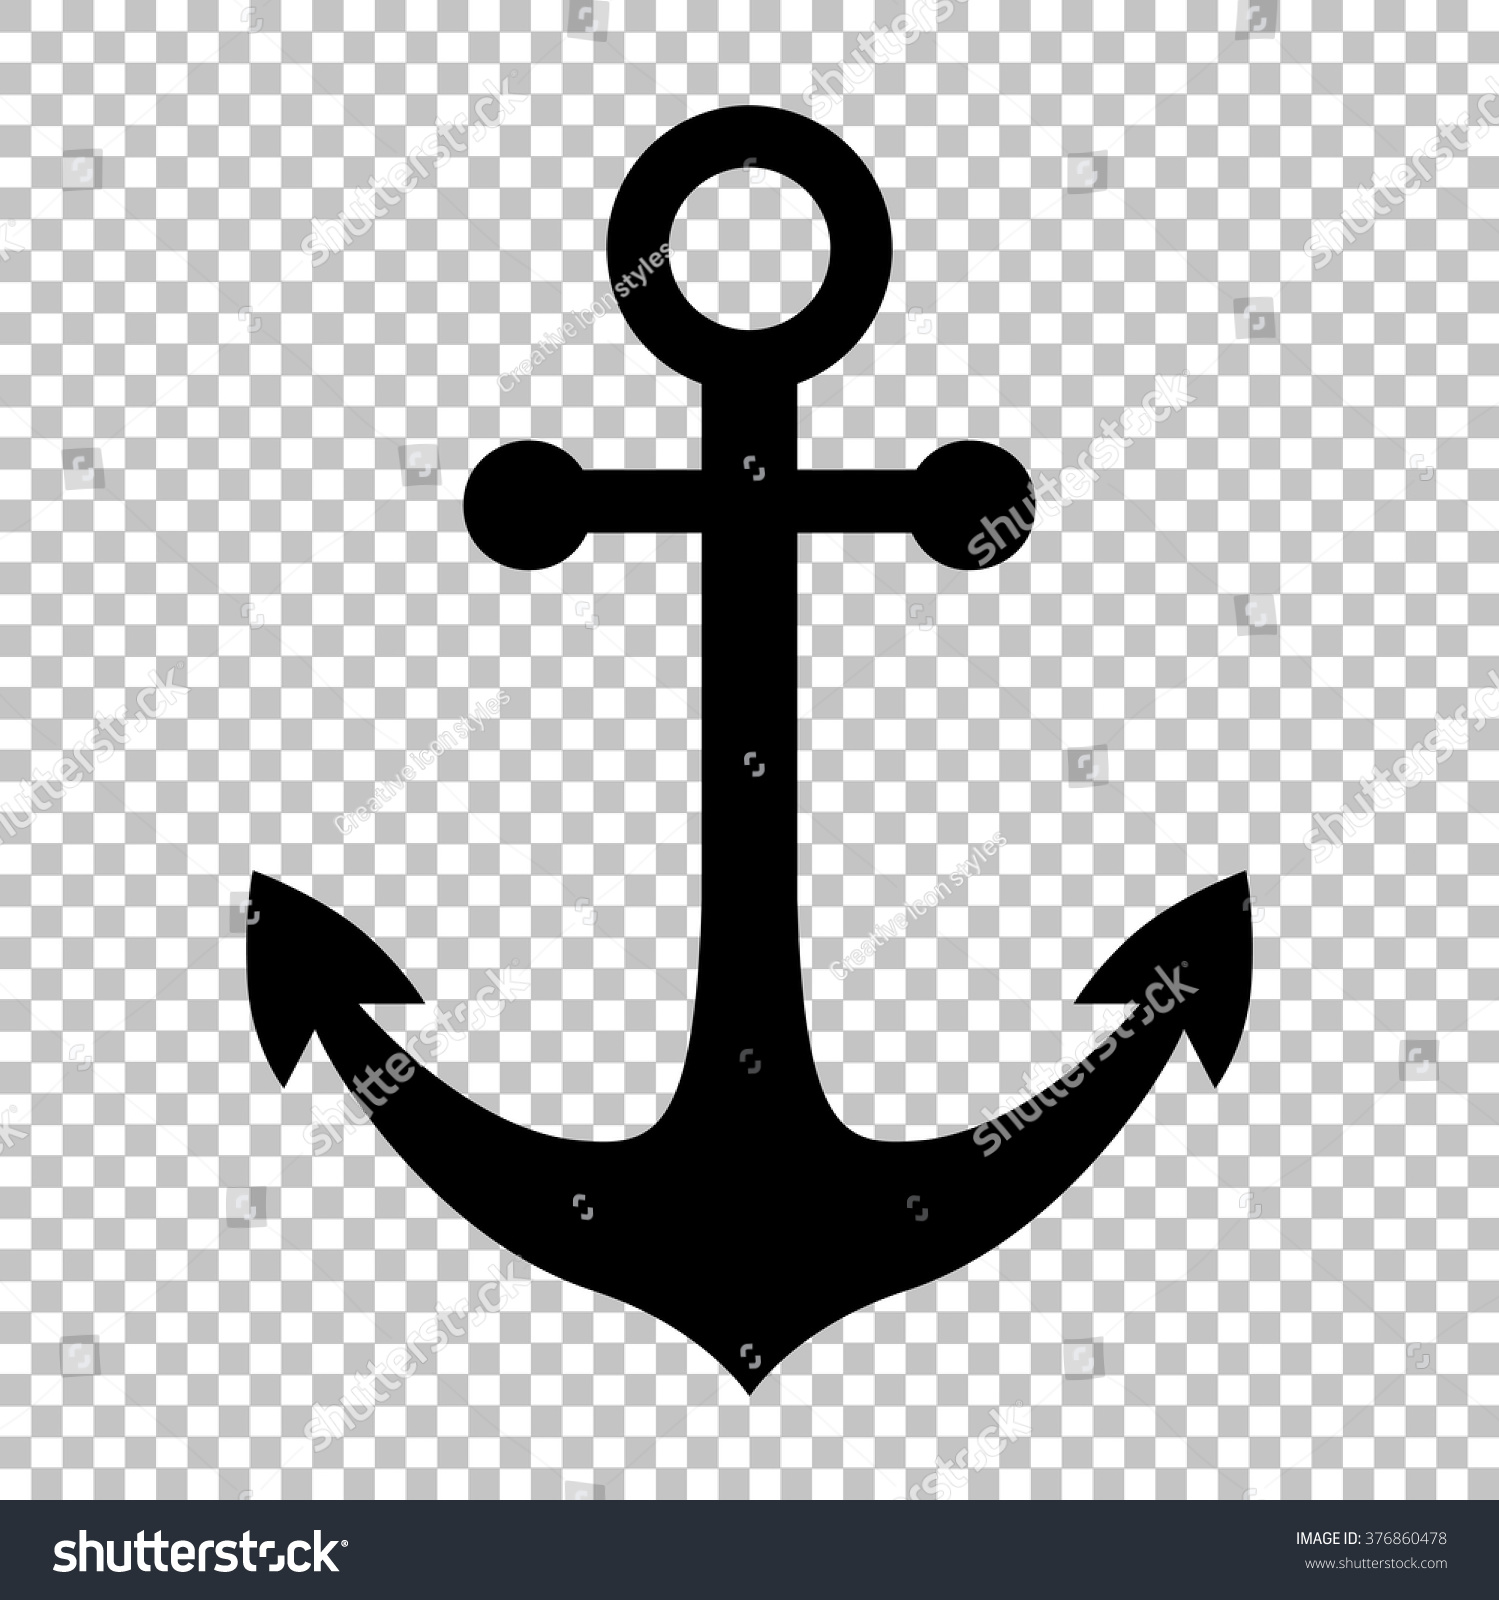 anchor clipart no background - photo #11